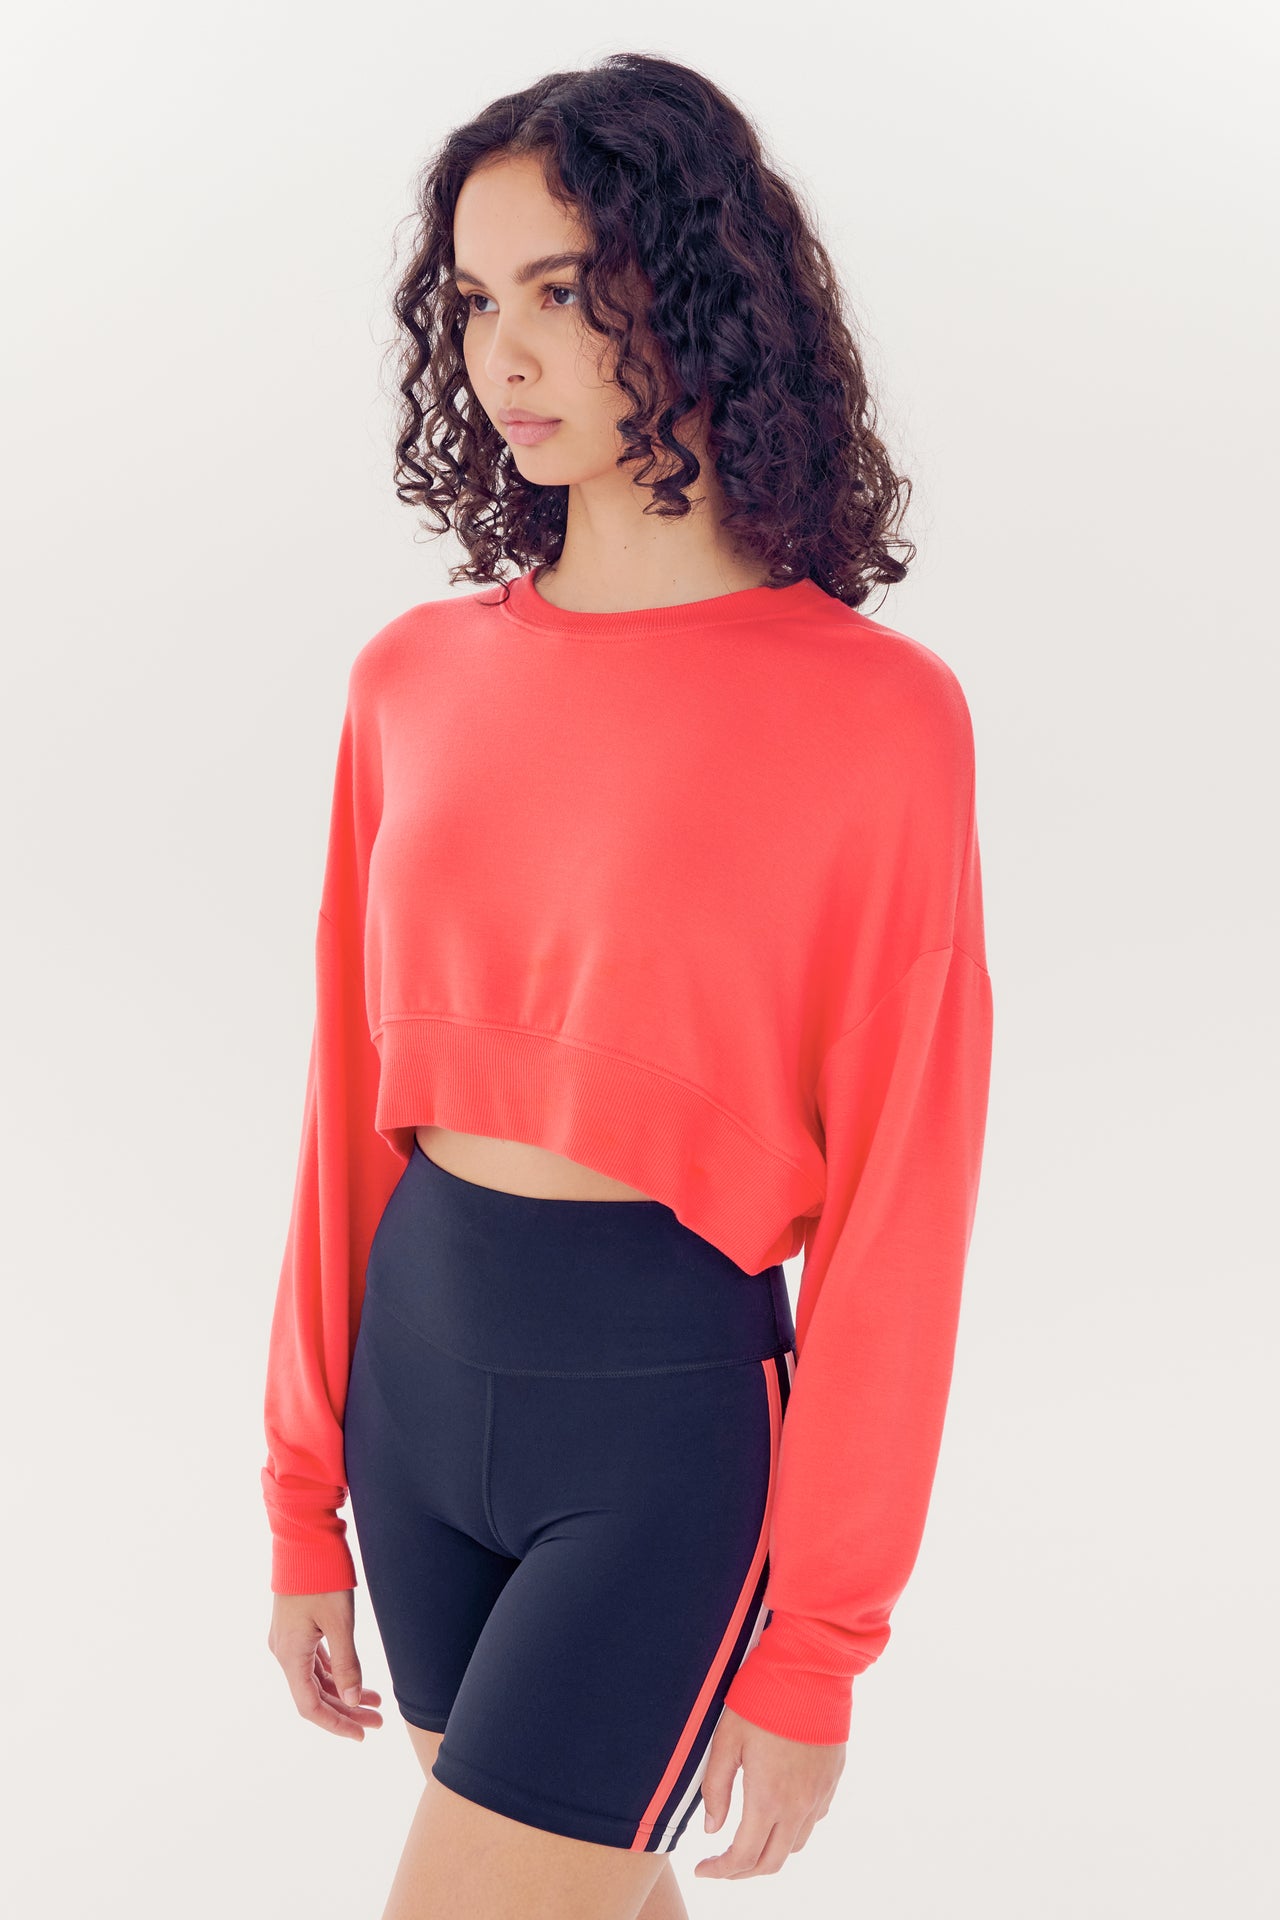 Woman in red Noah Fleece Crop Sweatshirt by SPLITS59 and black shorts made of modal spandex blend against a white background.